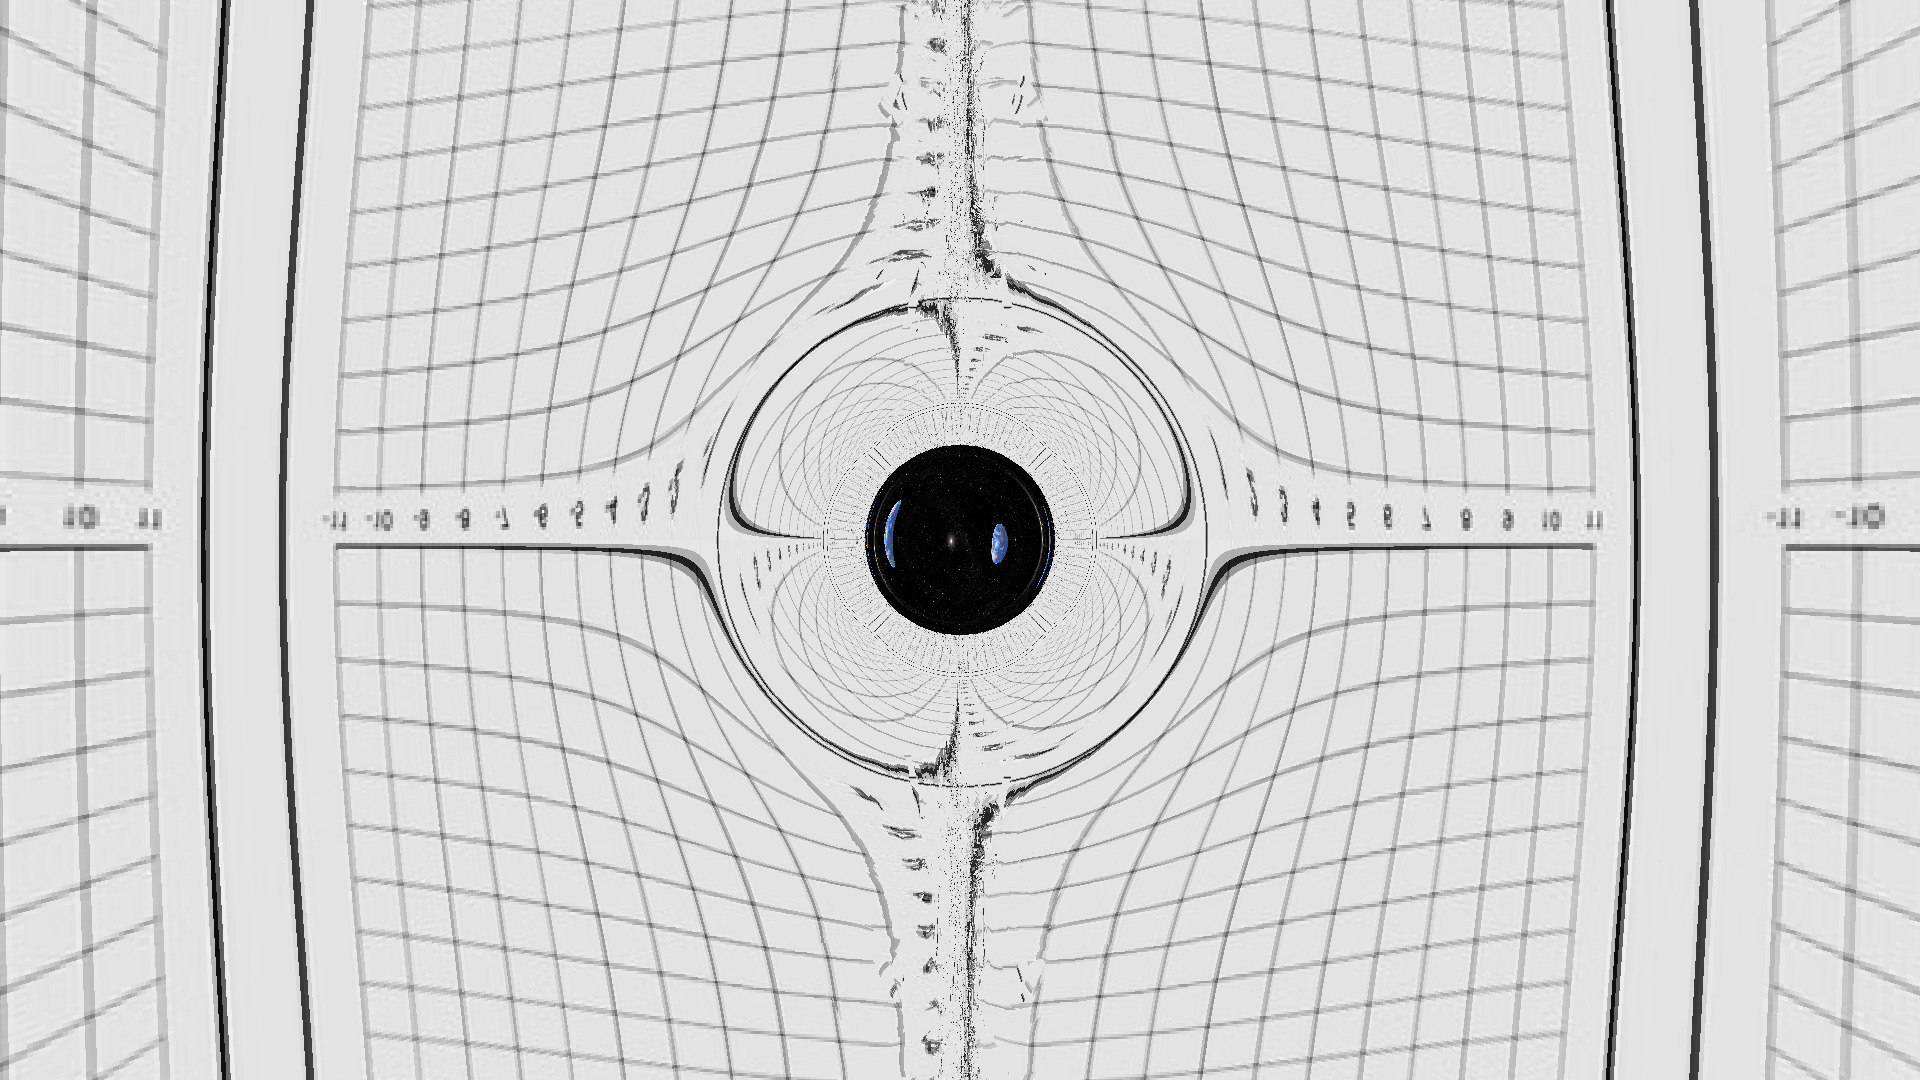  The distortion above and below the wormhole is caused by the axial coordinate
singularity. This image shows what happens if it is not
removed.